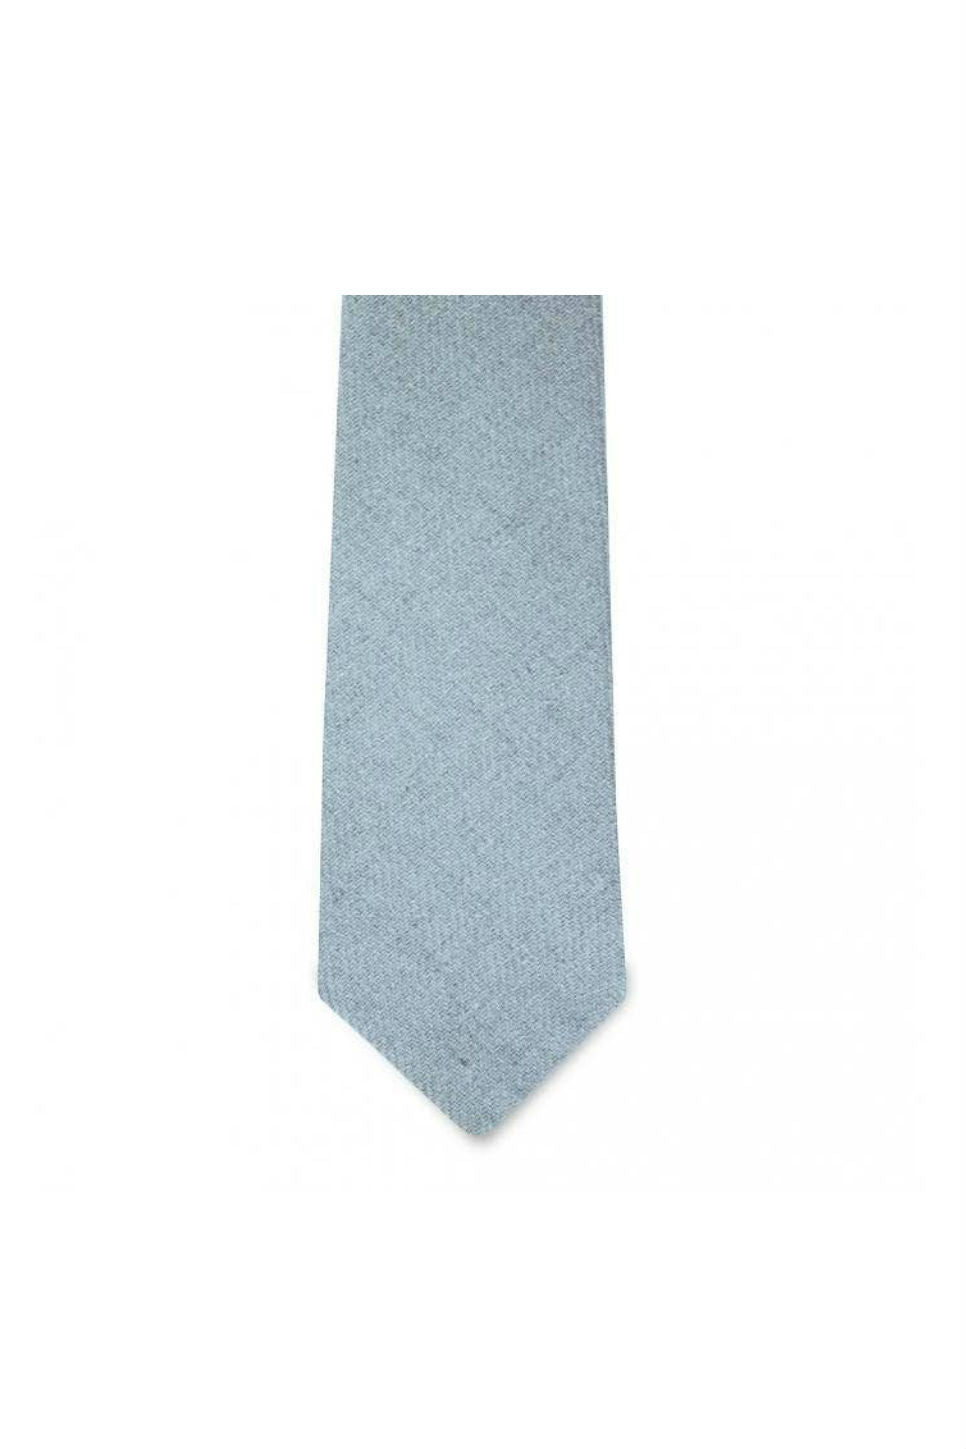 Pocket Square Clothing - The Clare Tie